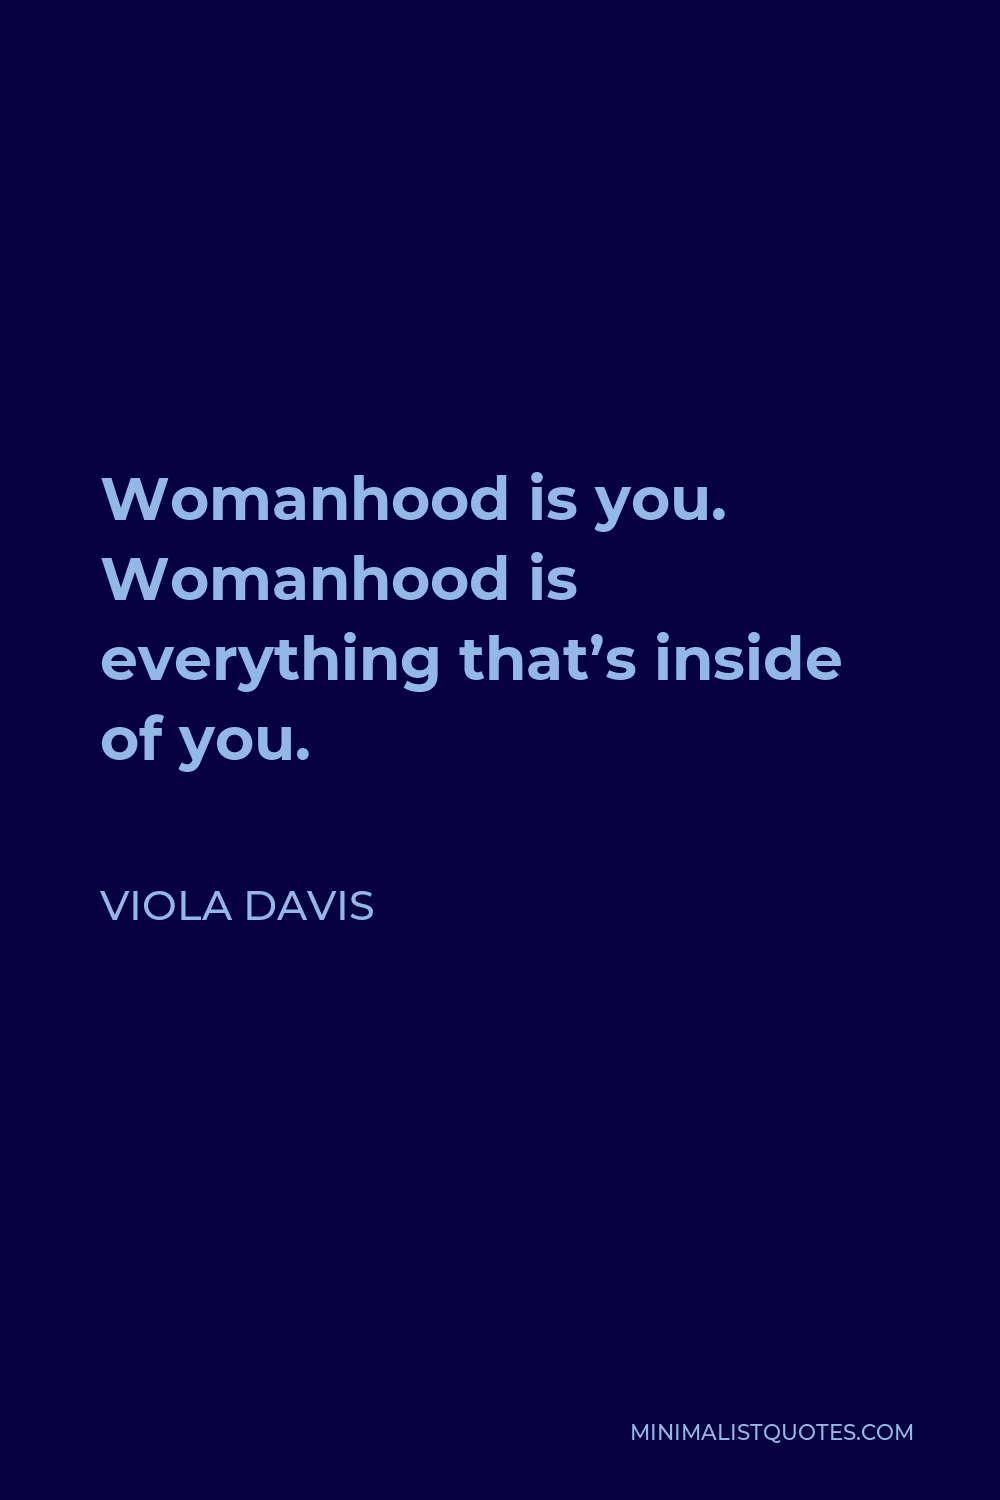 Viola Davis Quote - Womanhood is you. Womanhood is everything that’s inside of you.